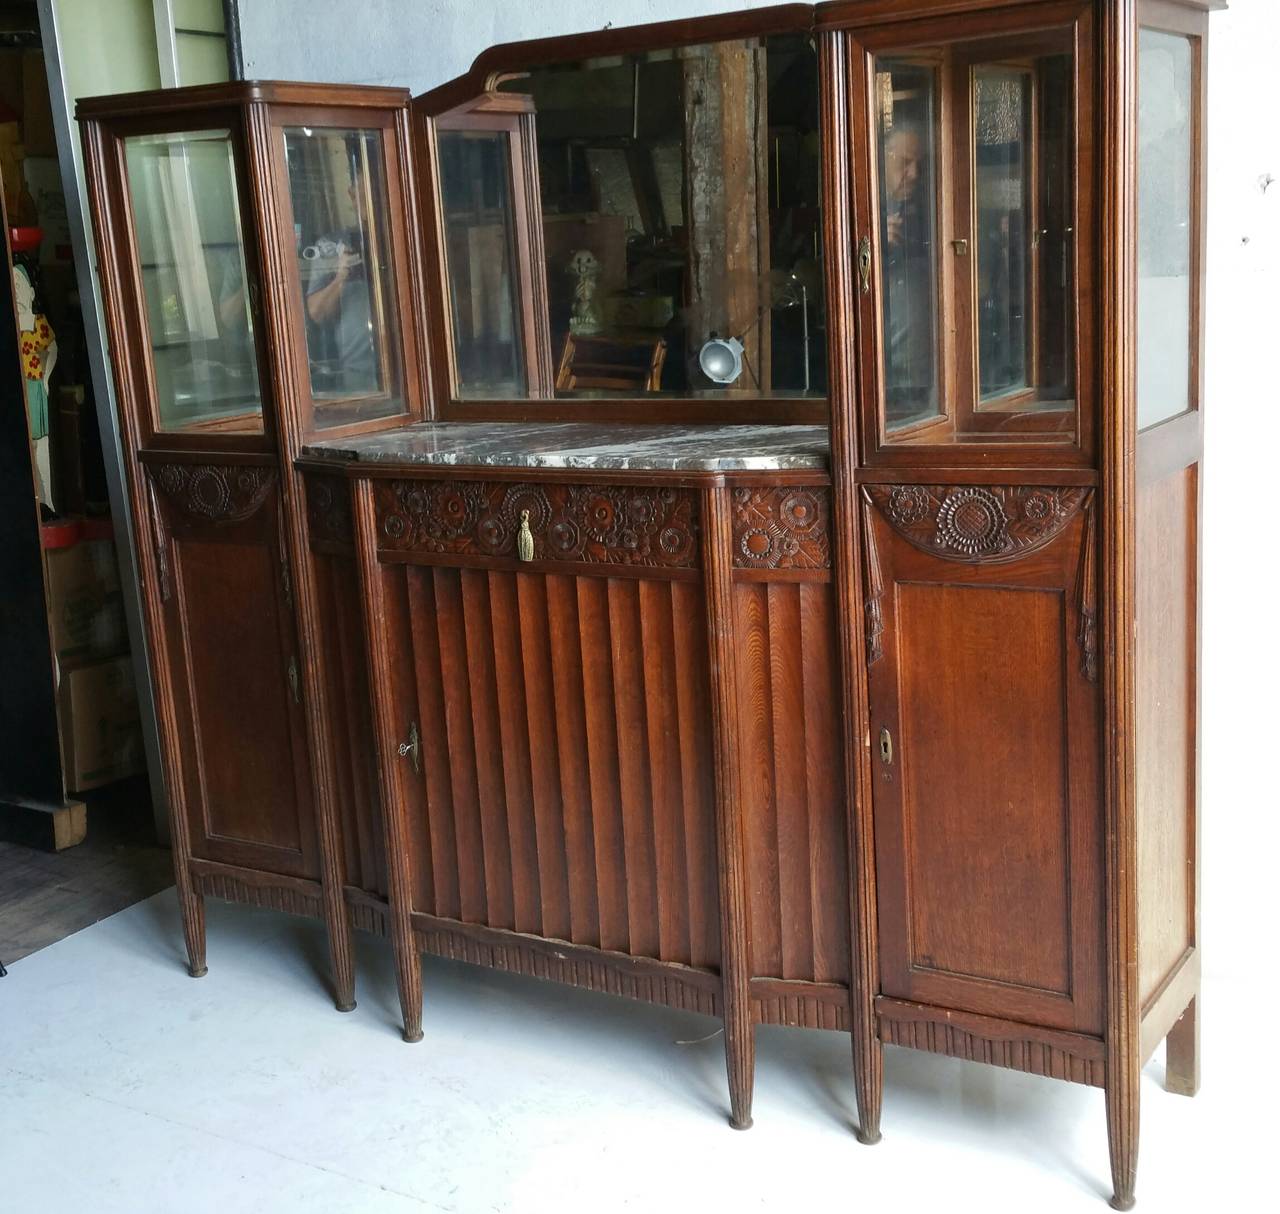 Exquisite French Art Deco Cabinet,, Carved wood and bronze detailing reminiscent of Paul Fallot's designs,,Features center beveled mirror and  beveled glass cabinets. Also retains original grey and white marble top..Classic French fluted legs,